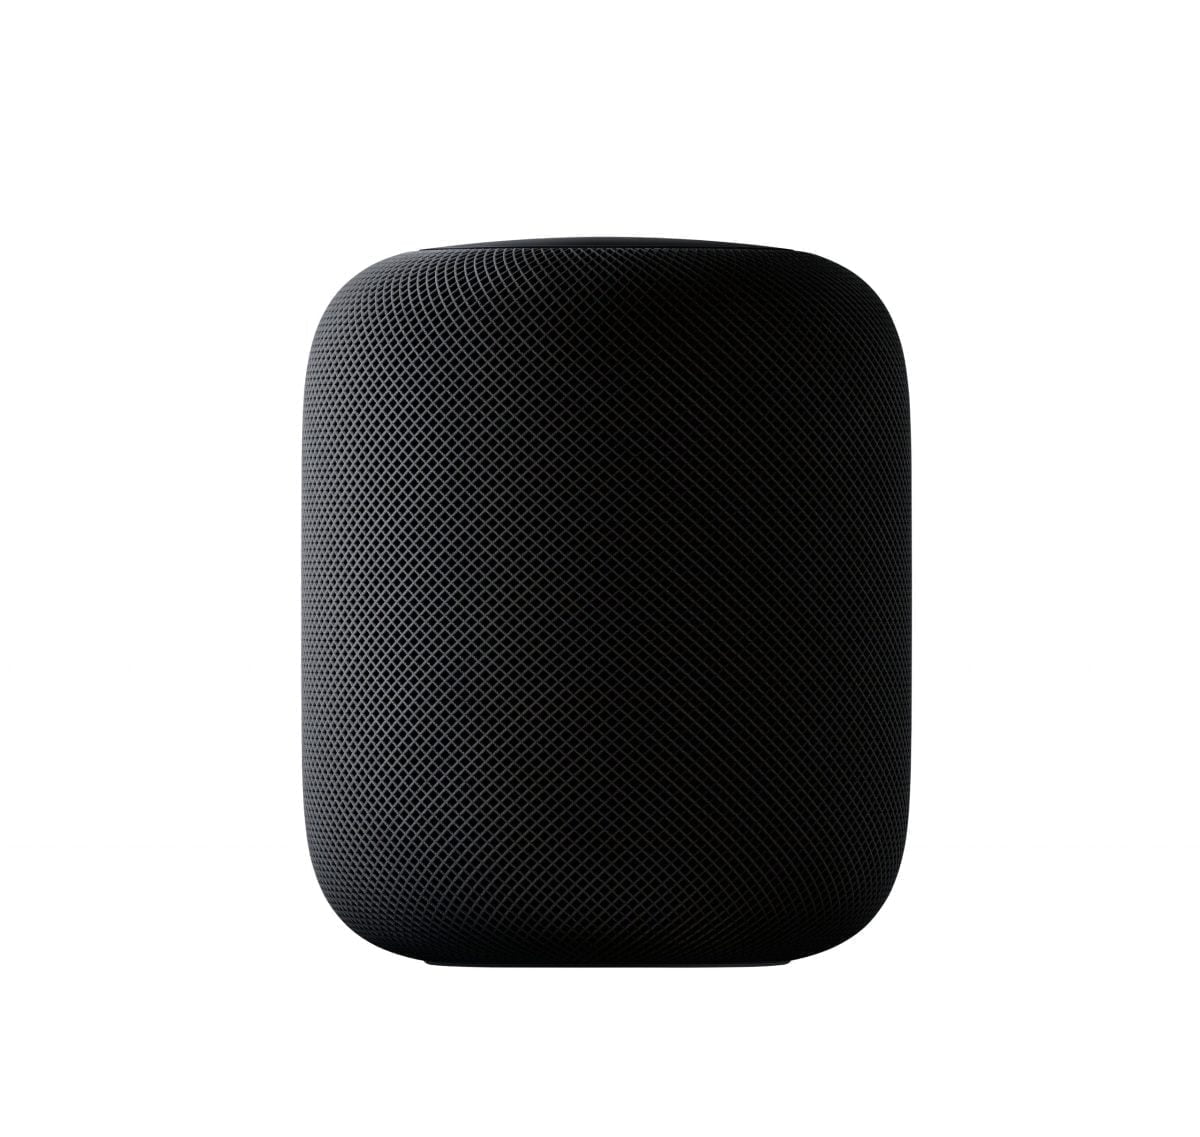 5902410 Sd Scaled Apple &Amp;Lt;P Class=&Amp;Quot;Hero-Intro Typography-Intro-Elevated Transition-2&Amp;Quot;&Amp;Gt;Homepod Is A Breakthrough Speaker That Adapts To Its Location And Delivers High-Fidelity Audio Wherever It’s Playing. Together With Apple Music And Siri, It Creates An Entirely New Way For You To Discover And Interact With Music At Home. And It Can Help You And Your Whole Family With Everyday Tasks — And Control Your Smart Home — All With Just Your Voice.&Amp;Lt;/P&Amp;Gt; &Amp;Lt;Strong&Amp;Gt;One Year International Apple Warranty&Amp;Lt;/Strong&Amp;Gt; Requires Iphone Se, Iphone 6S Or Later, Or Ipod Touch (7Th Generation) With The Latest Ios; Or Ipad Pro, Ipad (5Th Generation Or Later), Ipad Air 2 Or Later, Or Ipad Mini 4 Or Later With The Latest Ipados. Apple Homepod Smart Speaker Apple Homepod Smart Speaker - Space Gray